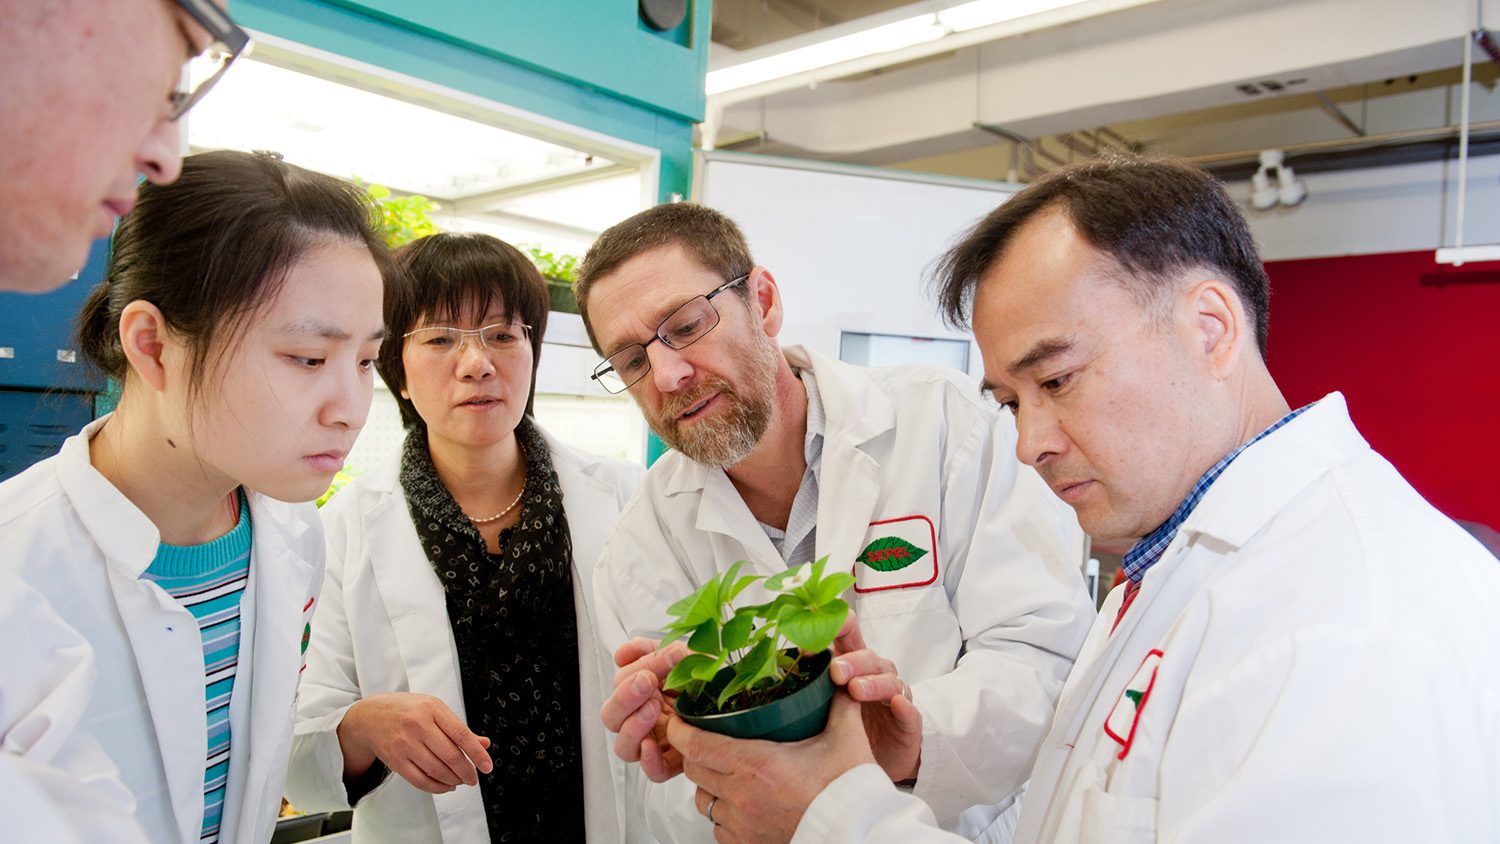 Five NC State College of Agriculture and Life Sciences researchers examine a small dogwood plant in a pot in a laboratory setting.